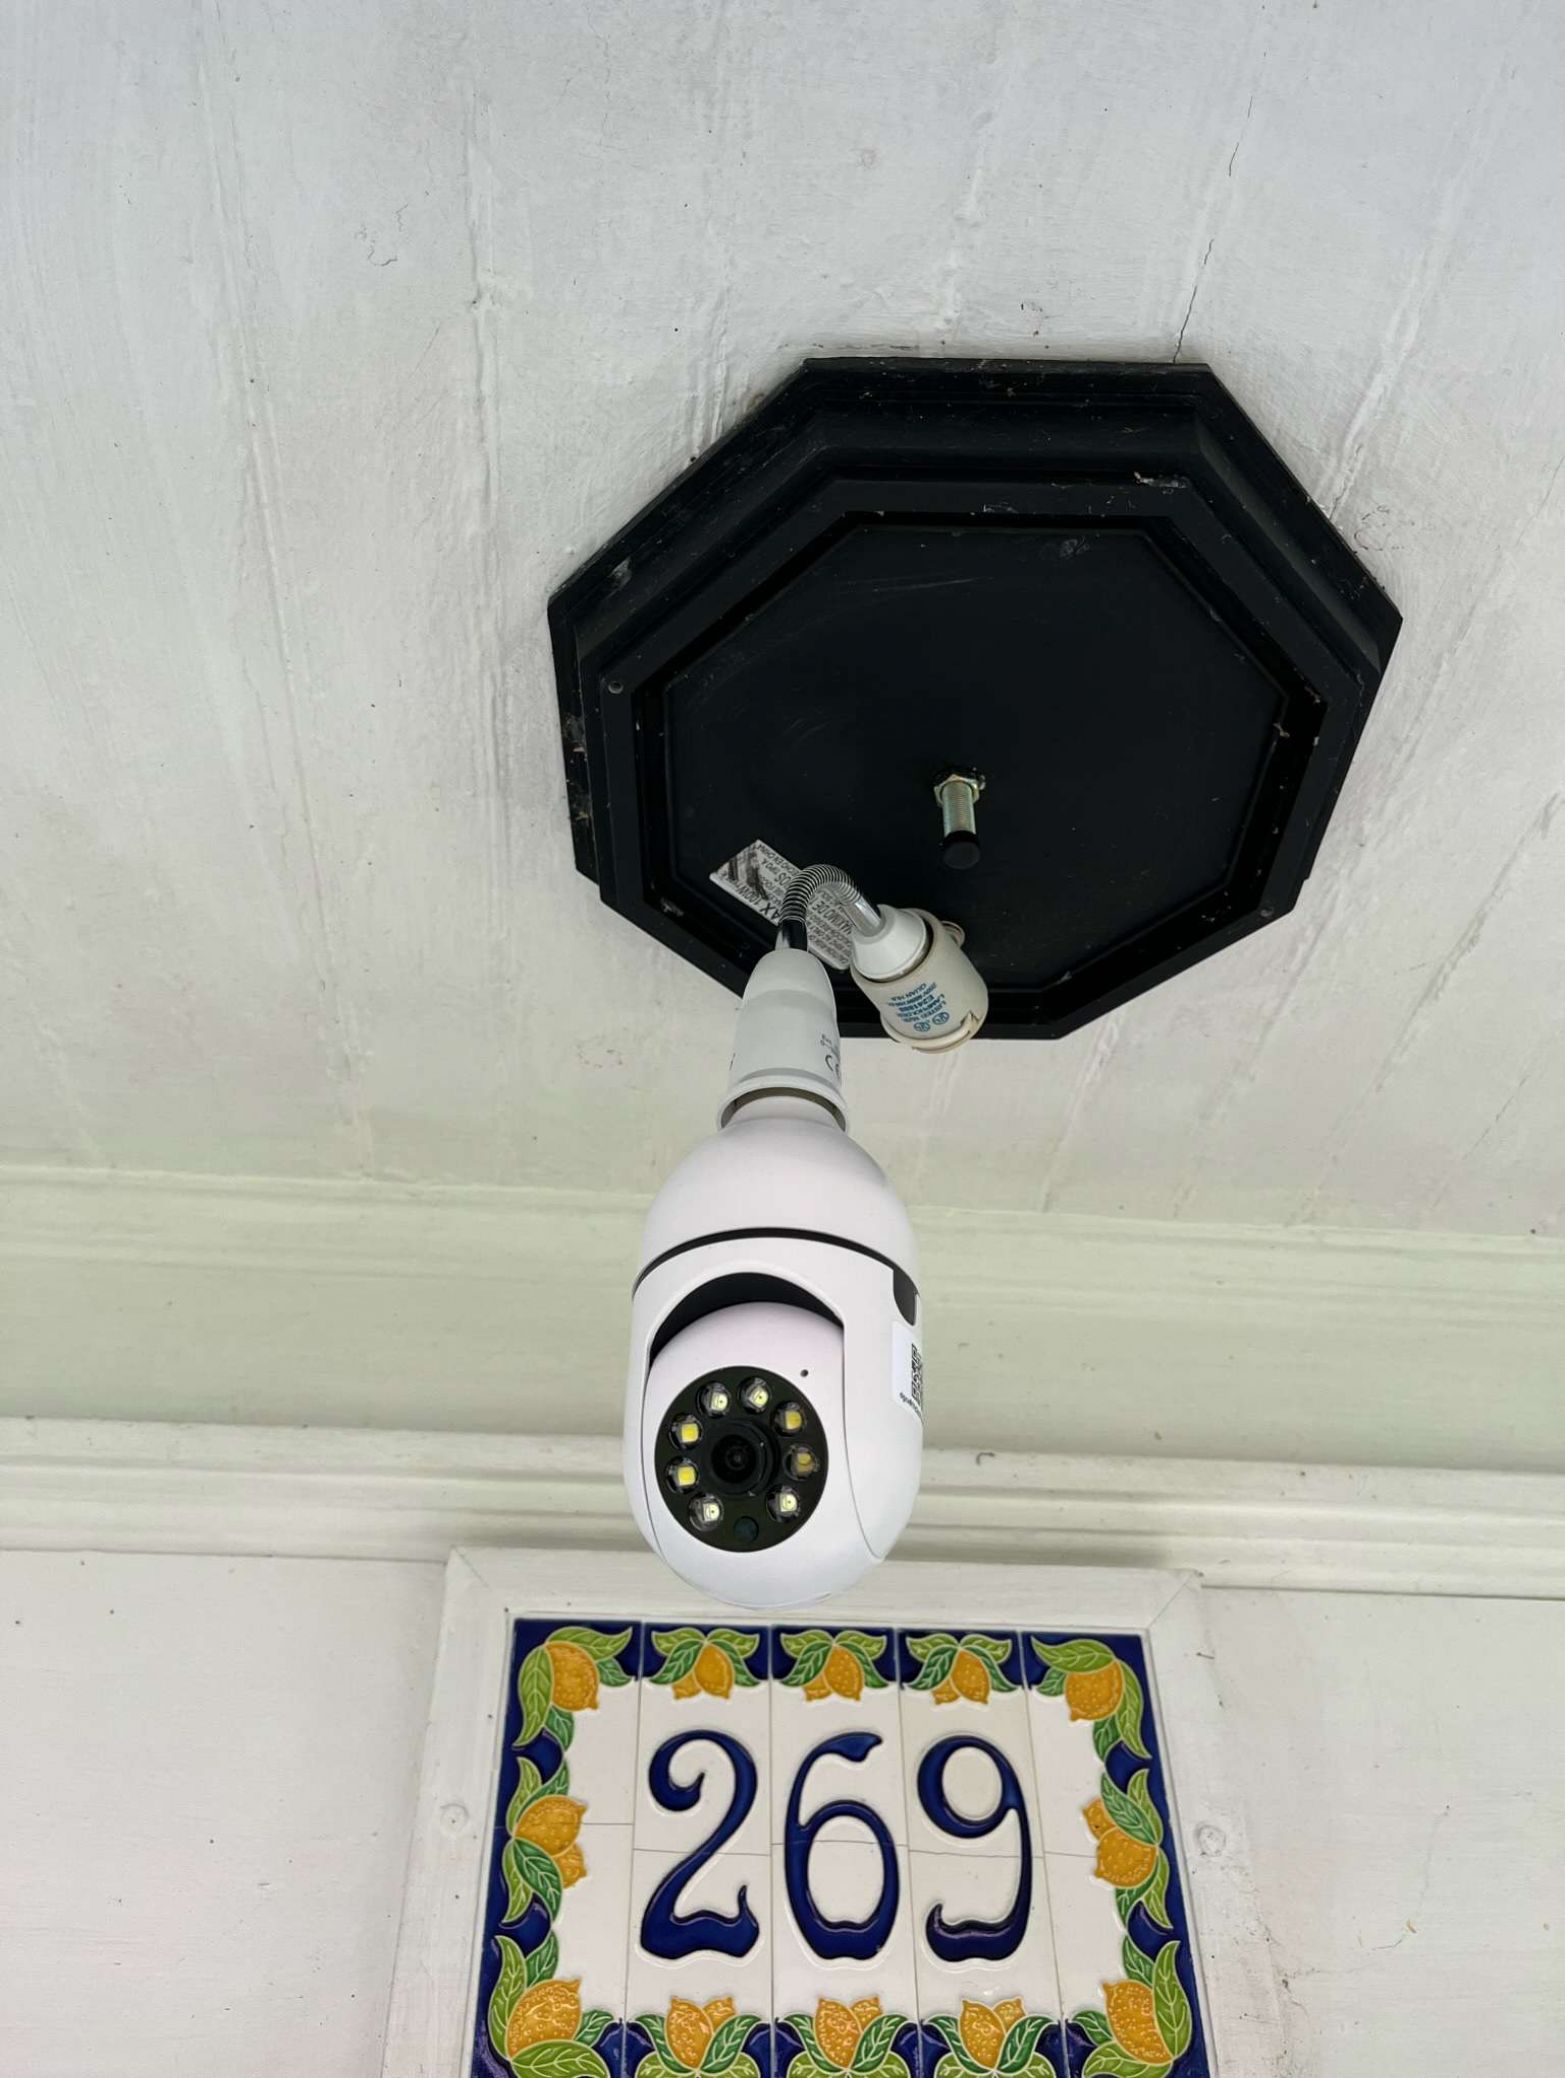 Is Nomad Security Camera Legit Or A Scam